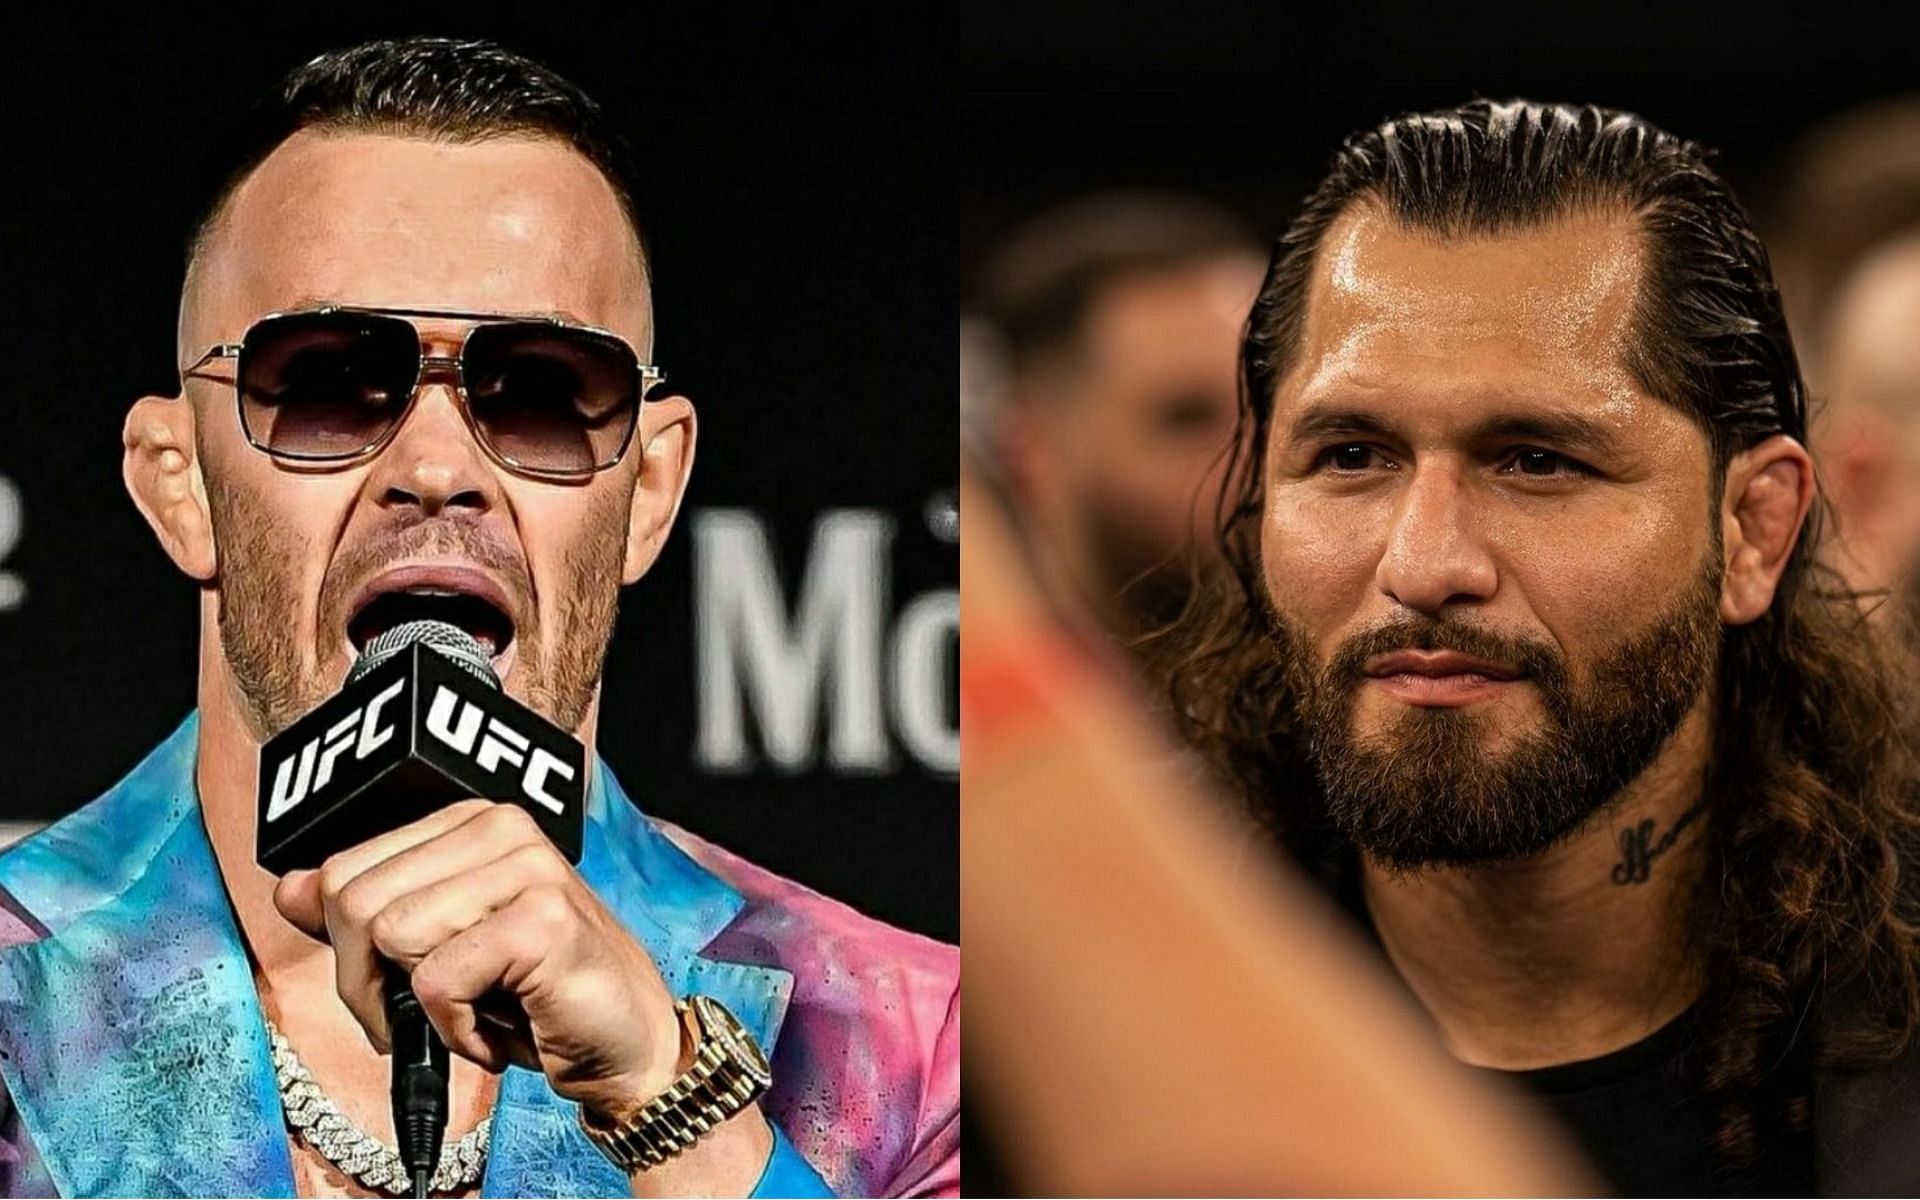 Colby Covington (left; Image Credit: via @colbycovmma on Instagram) and Jorge Masvidal (right; Photo Courtesy: @gamebredfighter on Insta)